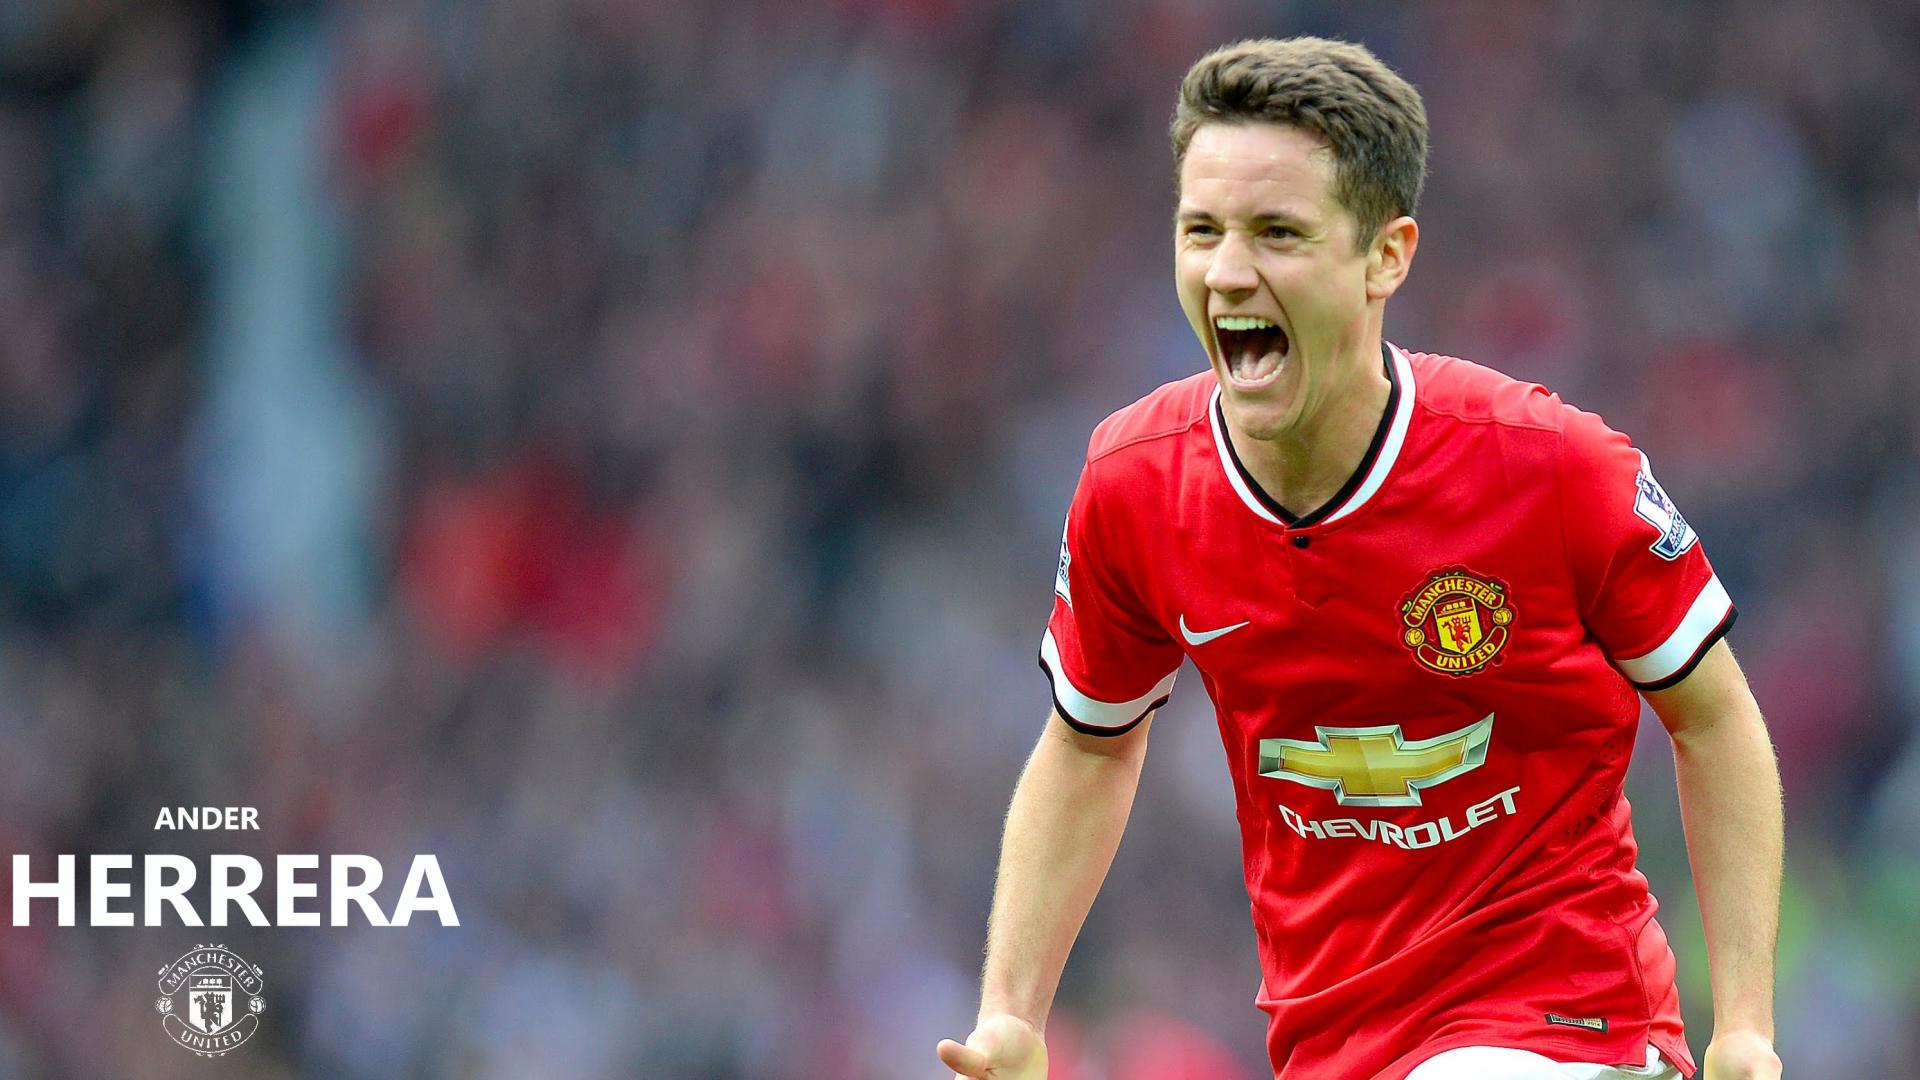 Players Of Manchester United Ander Herrera HD Wallpaper